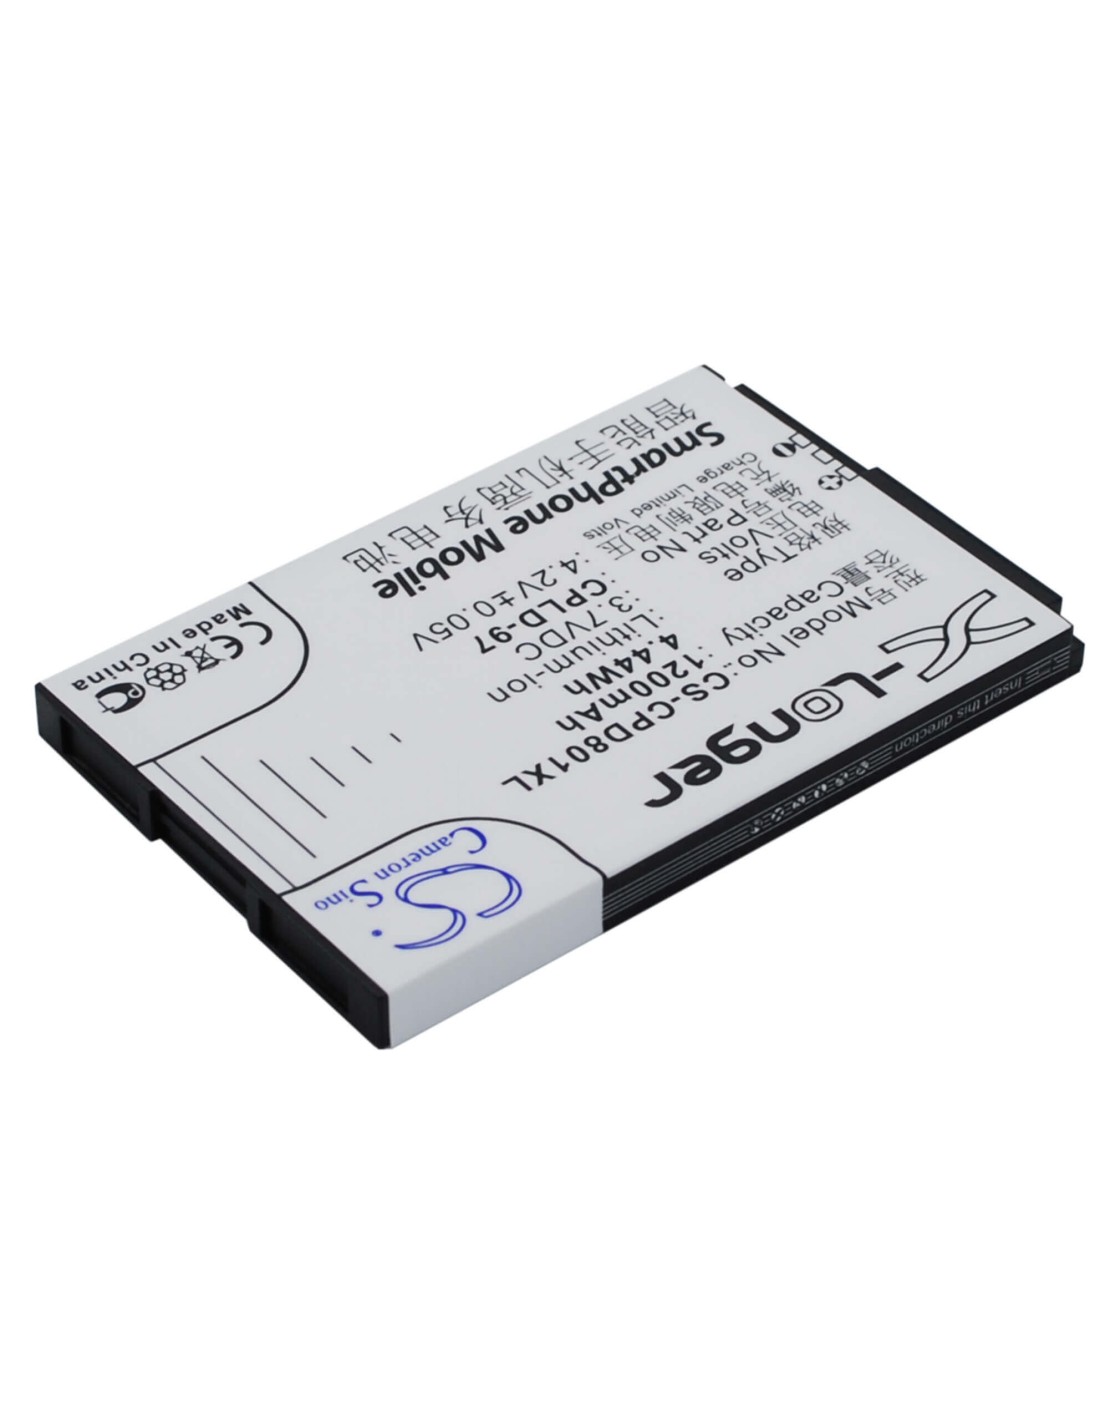 Battery for Coolpad 8010 3.7V, 1200mAh - 4.44Wh